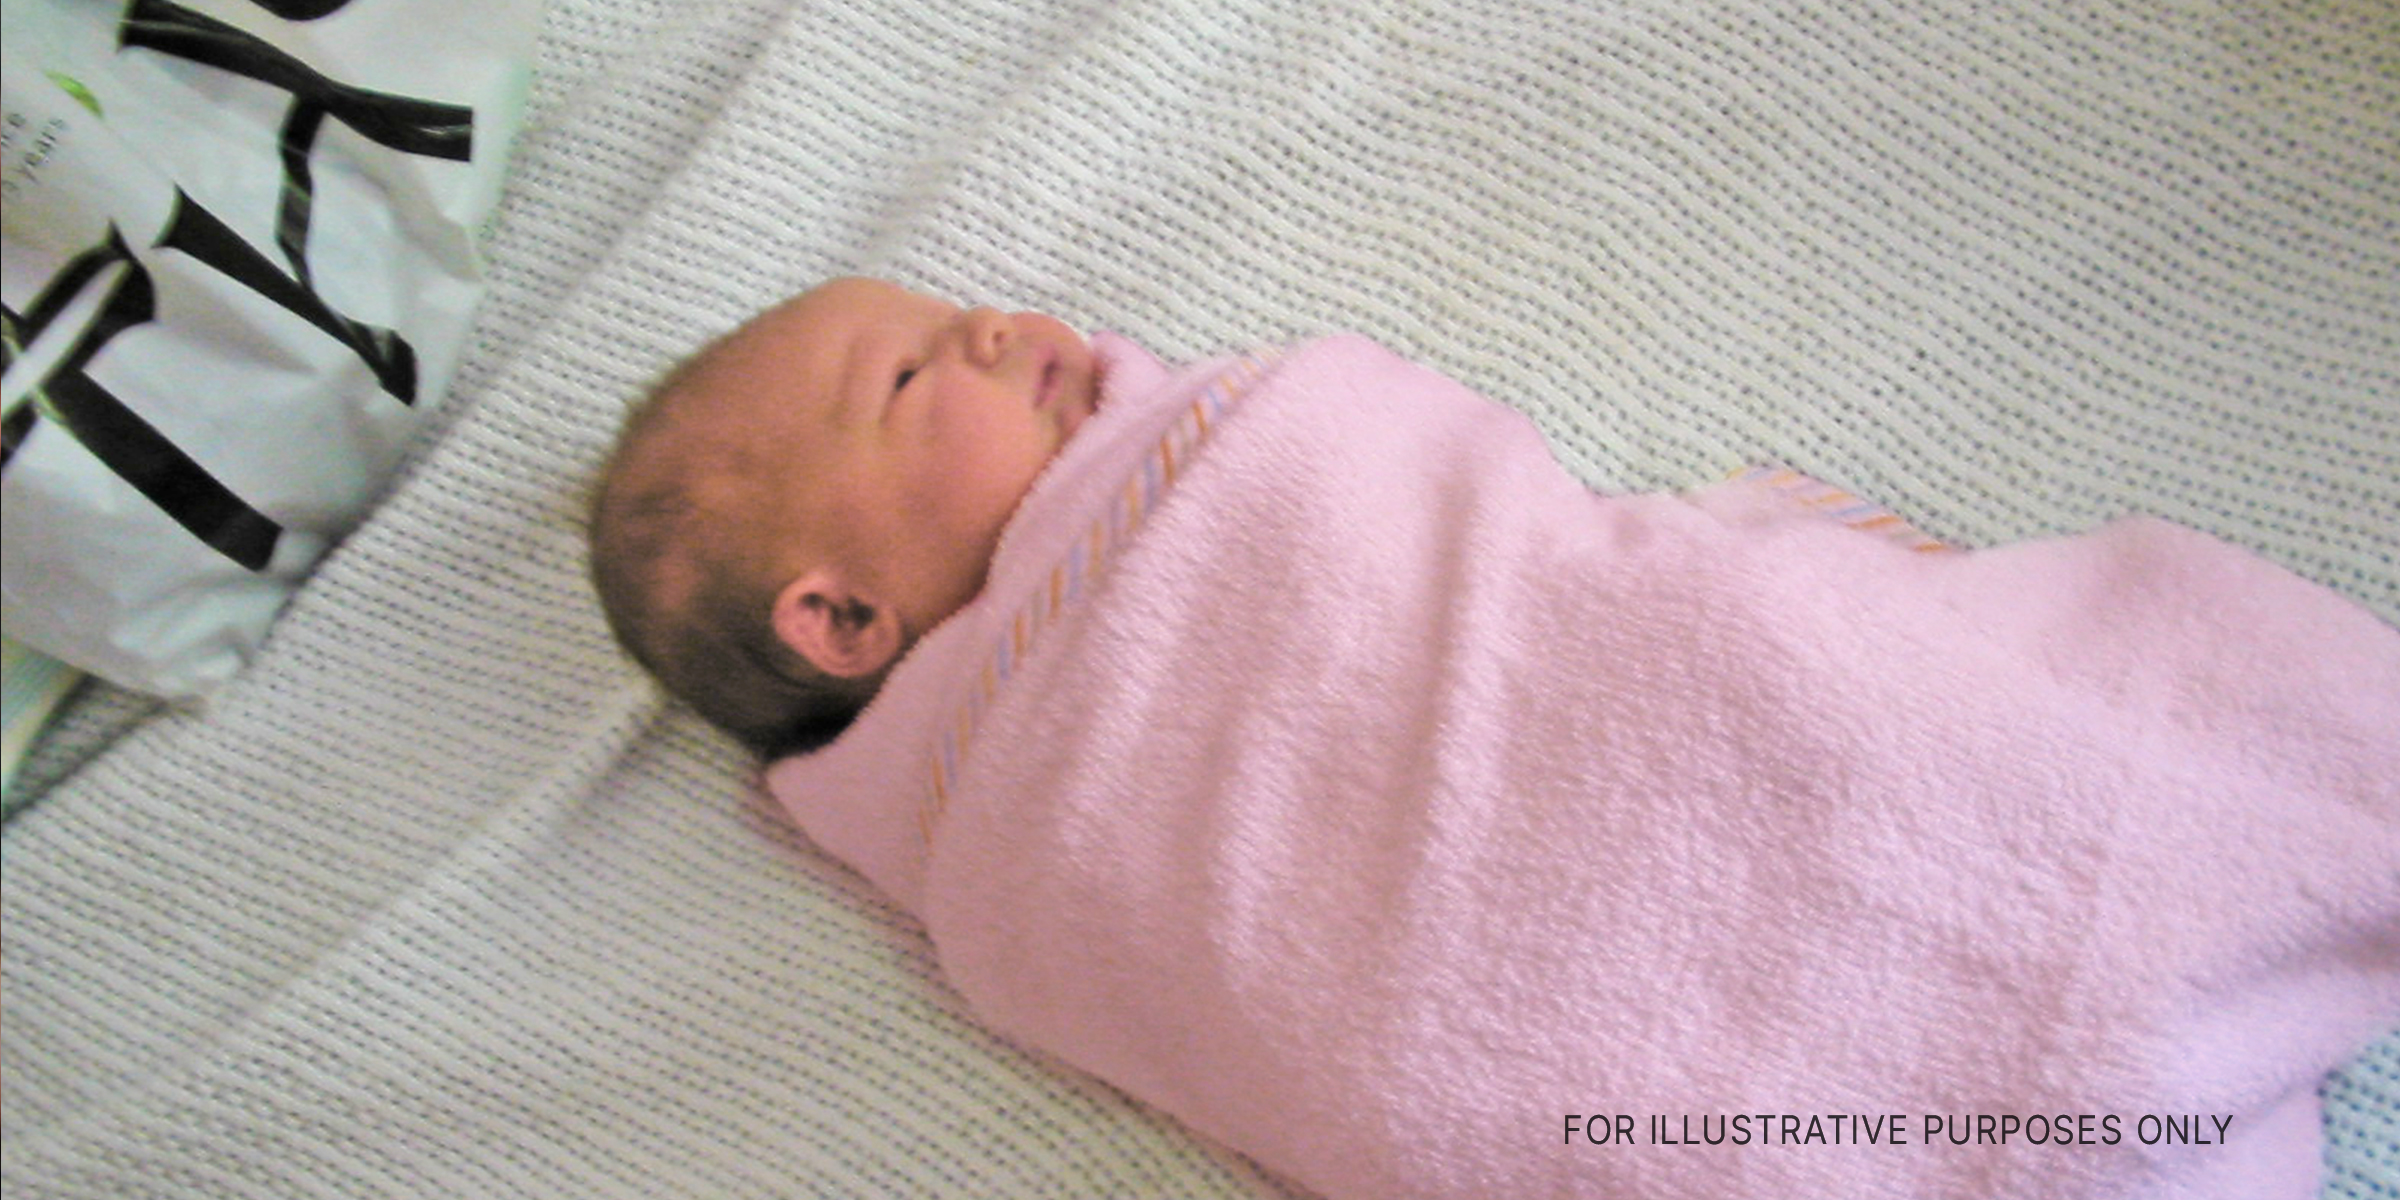 Cute Baby Wrapped In a Towel. | Source: Flickr/shegingerly (CC BY-SA 2.0)